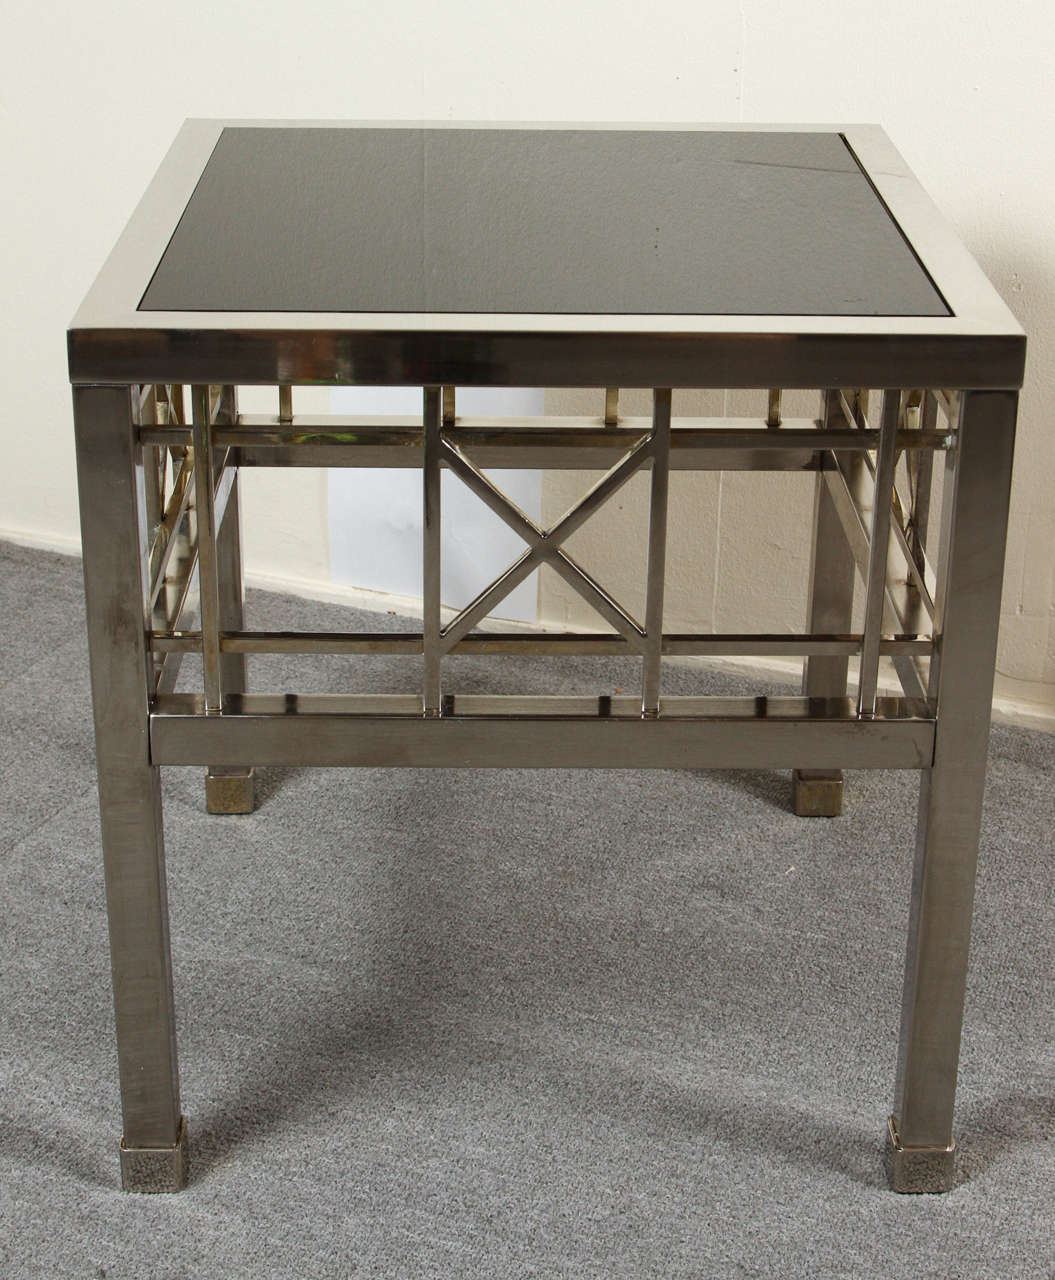 Pair of Campaign style side tables in nickel and brass with black glass inset in the top.